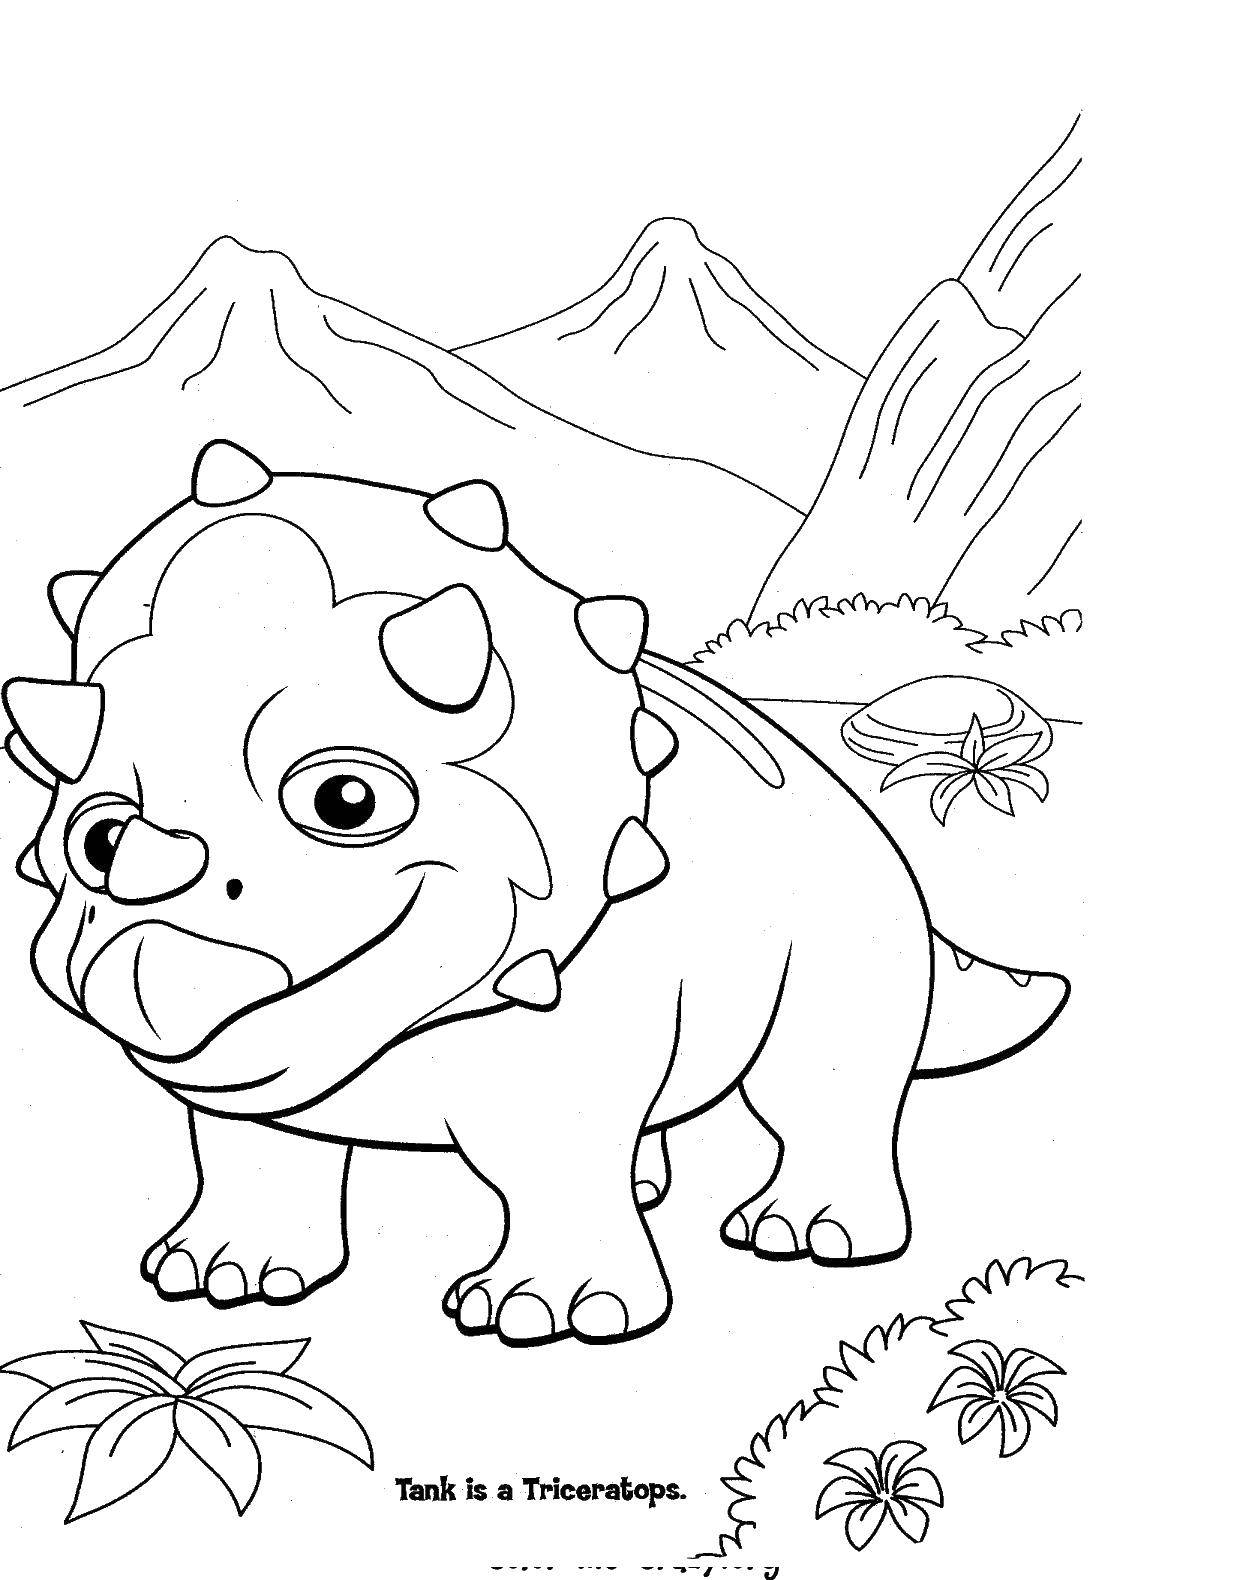 Coloring The baby Triceratops. Category dinosaur. Tags:  Dinosaurs.